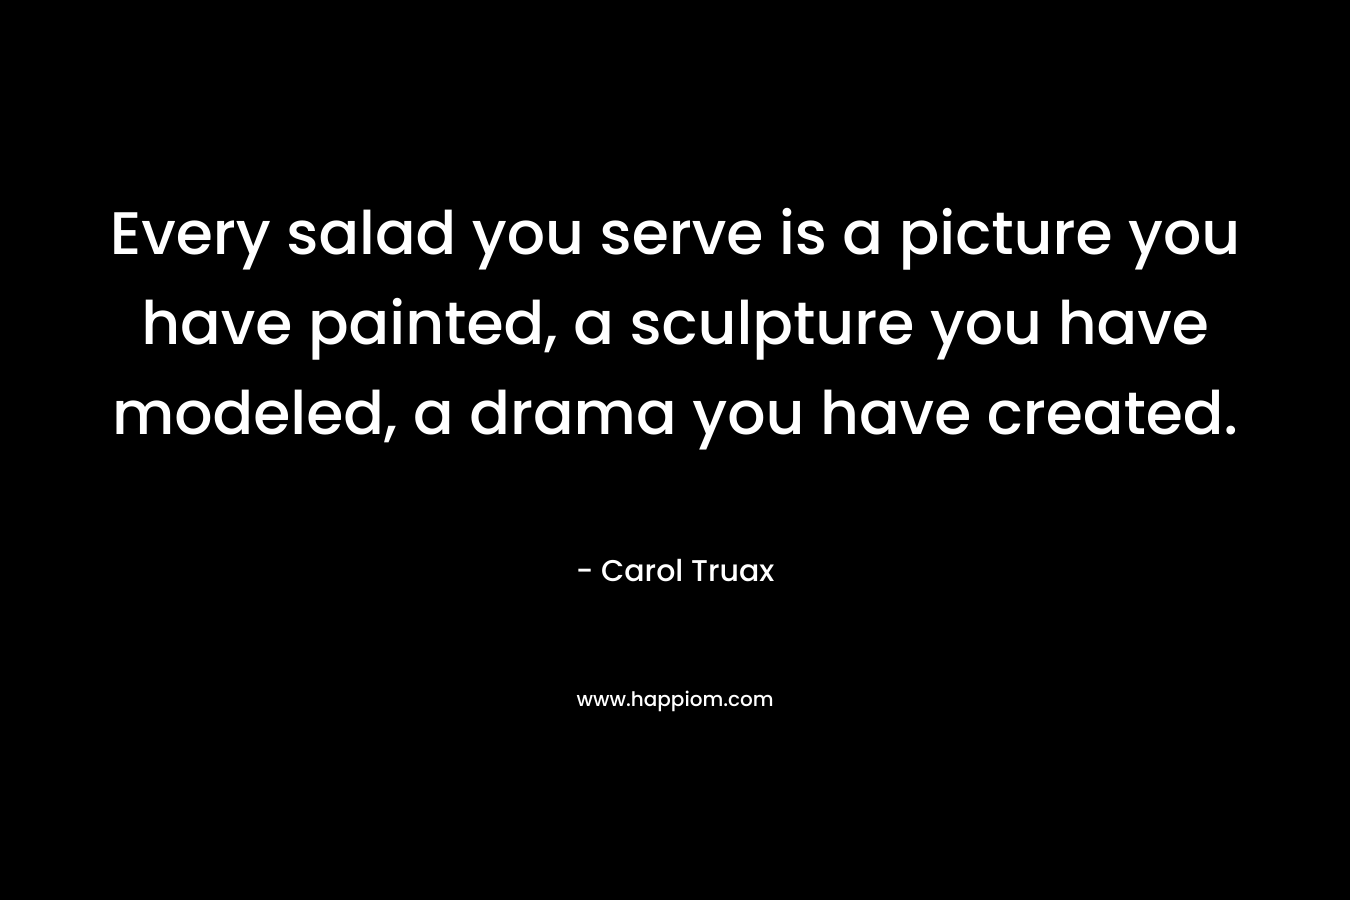 Every salad you serve is a picture you have painted, a sculpture you have modeled, a drama you have created. – Carol Truax